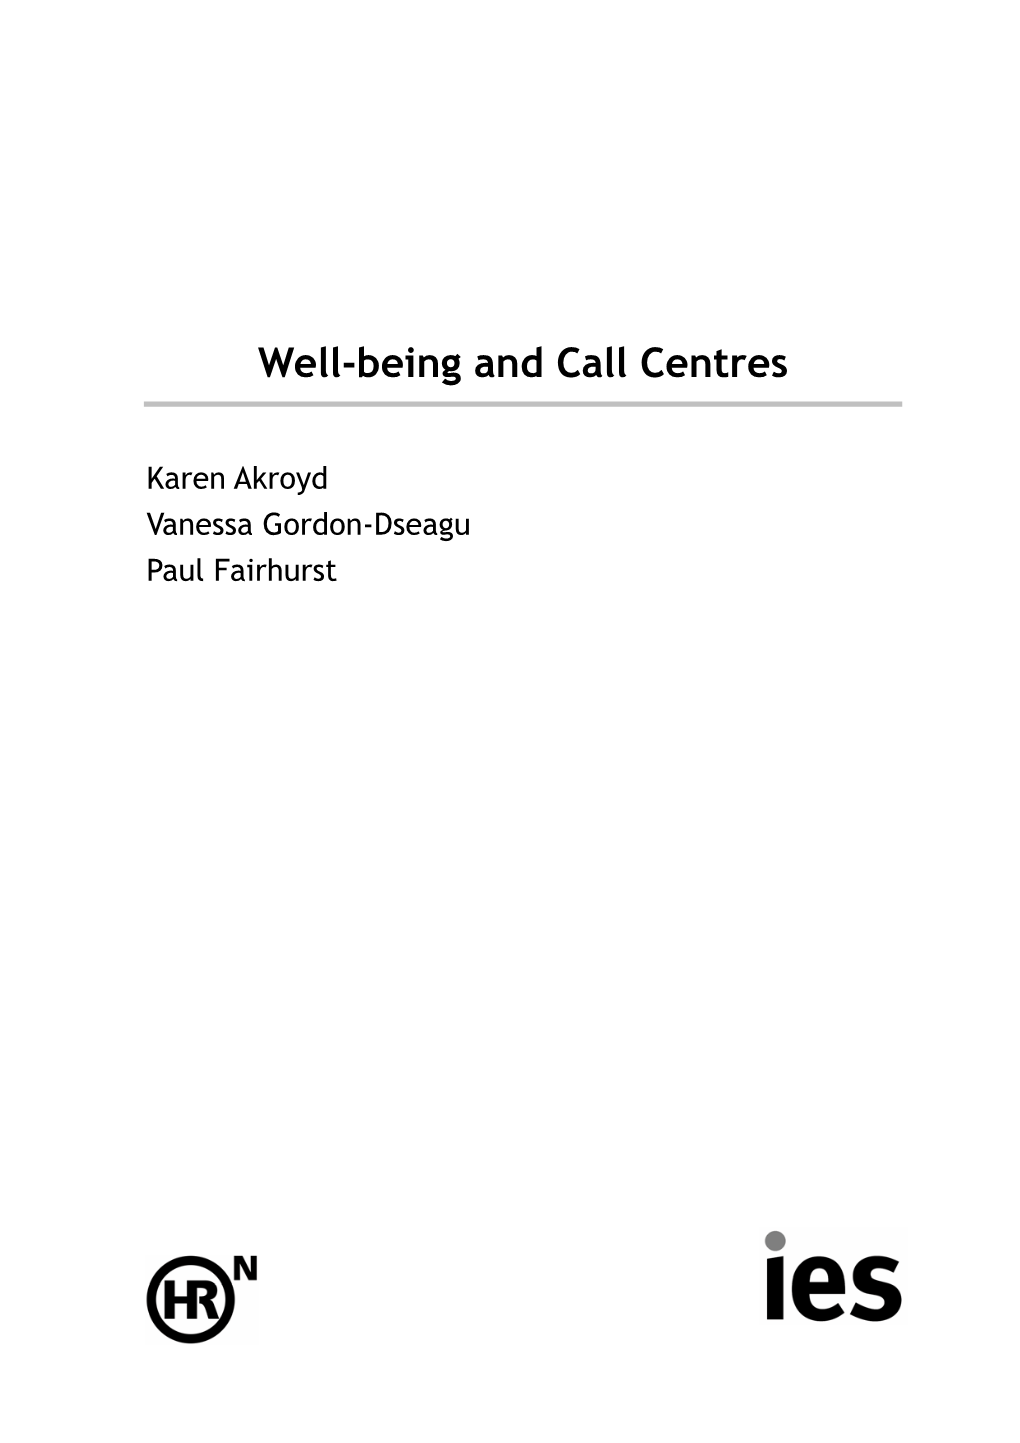 Well-Being and Call Centres